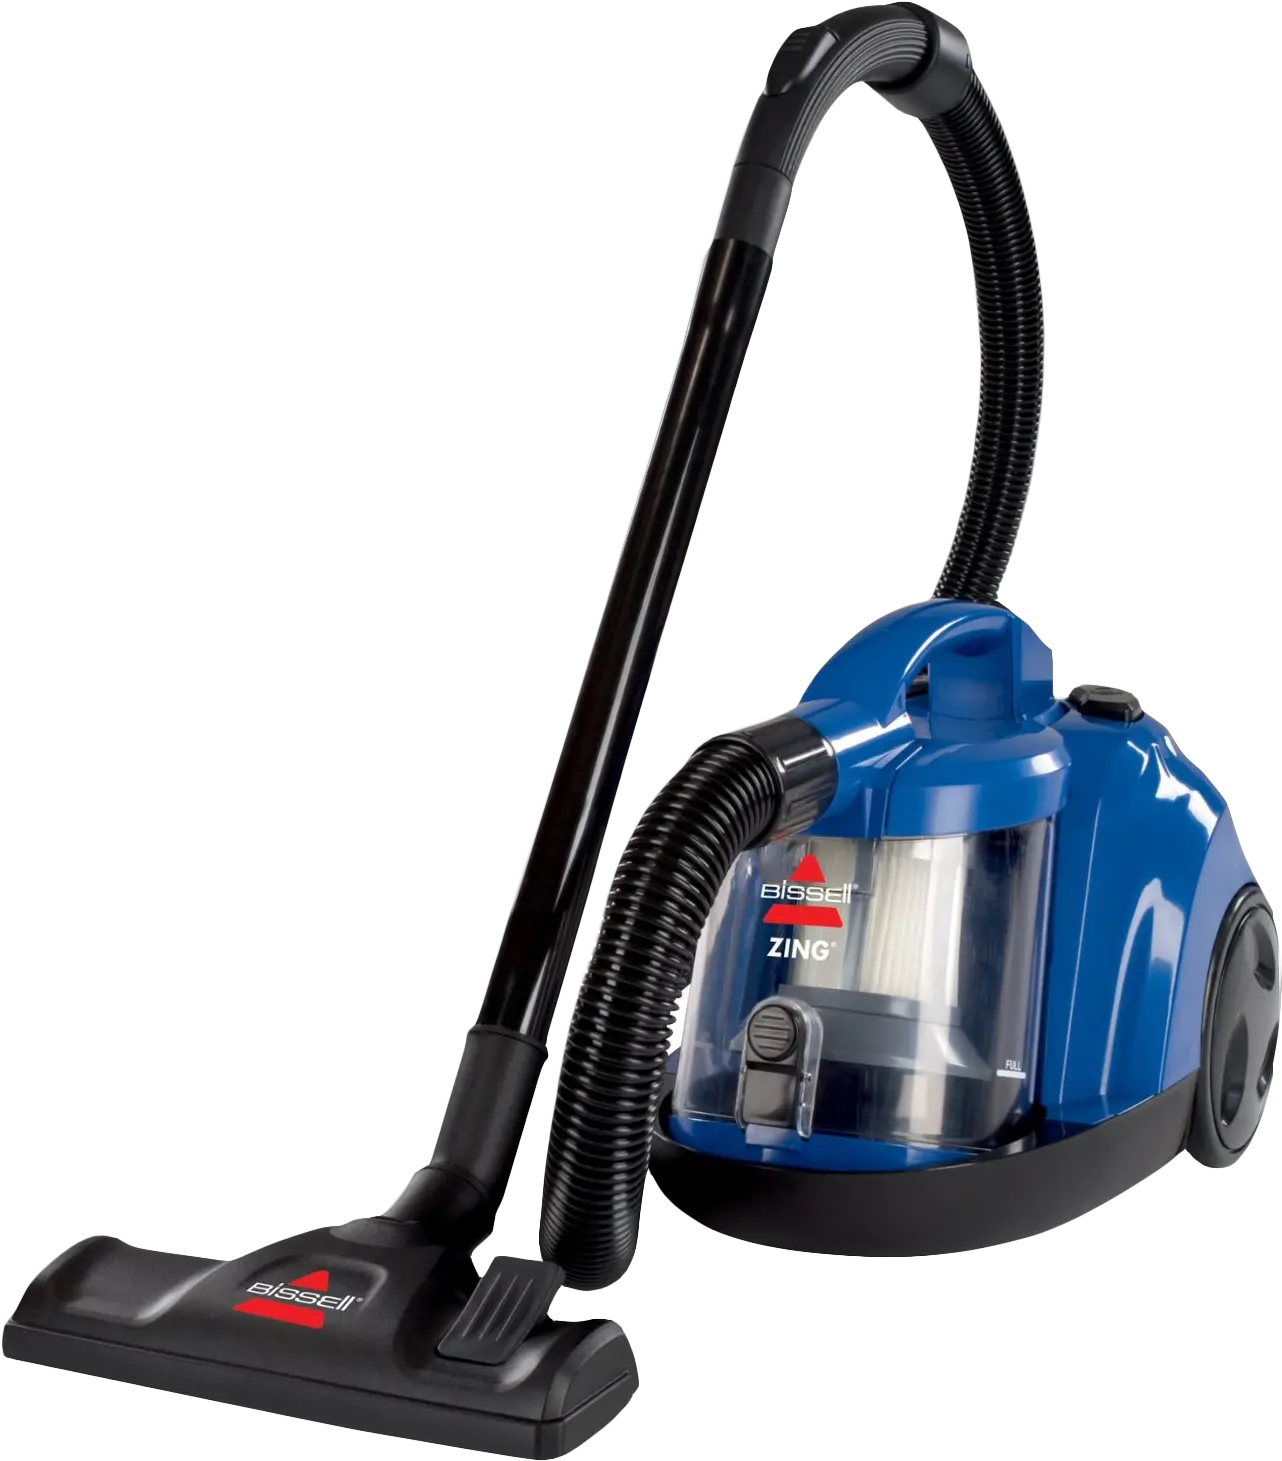 Download Blue Vacuum Cleaner Png Image Bissell Zing Vacuum Png